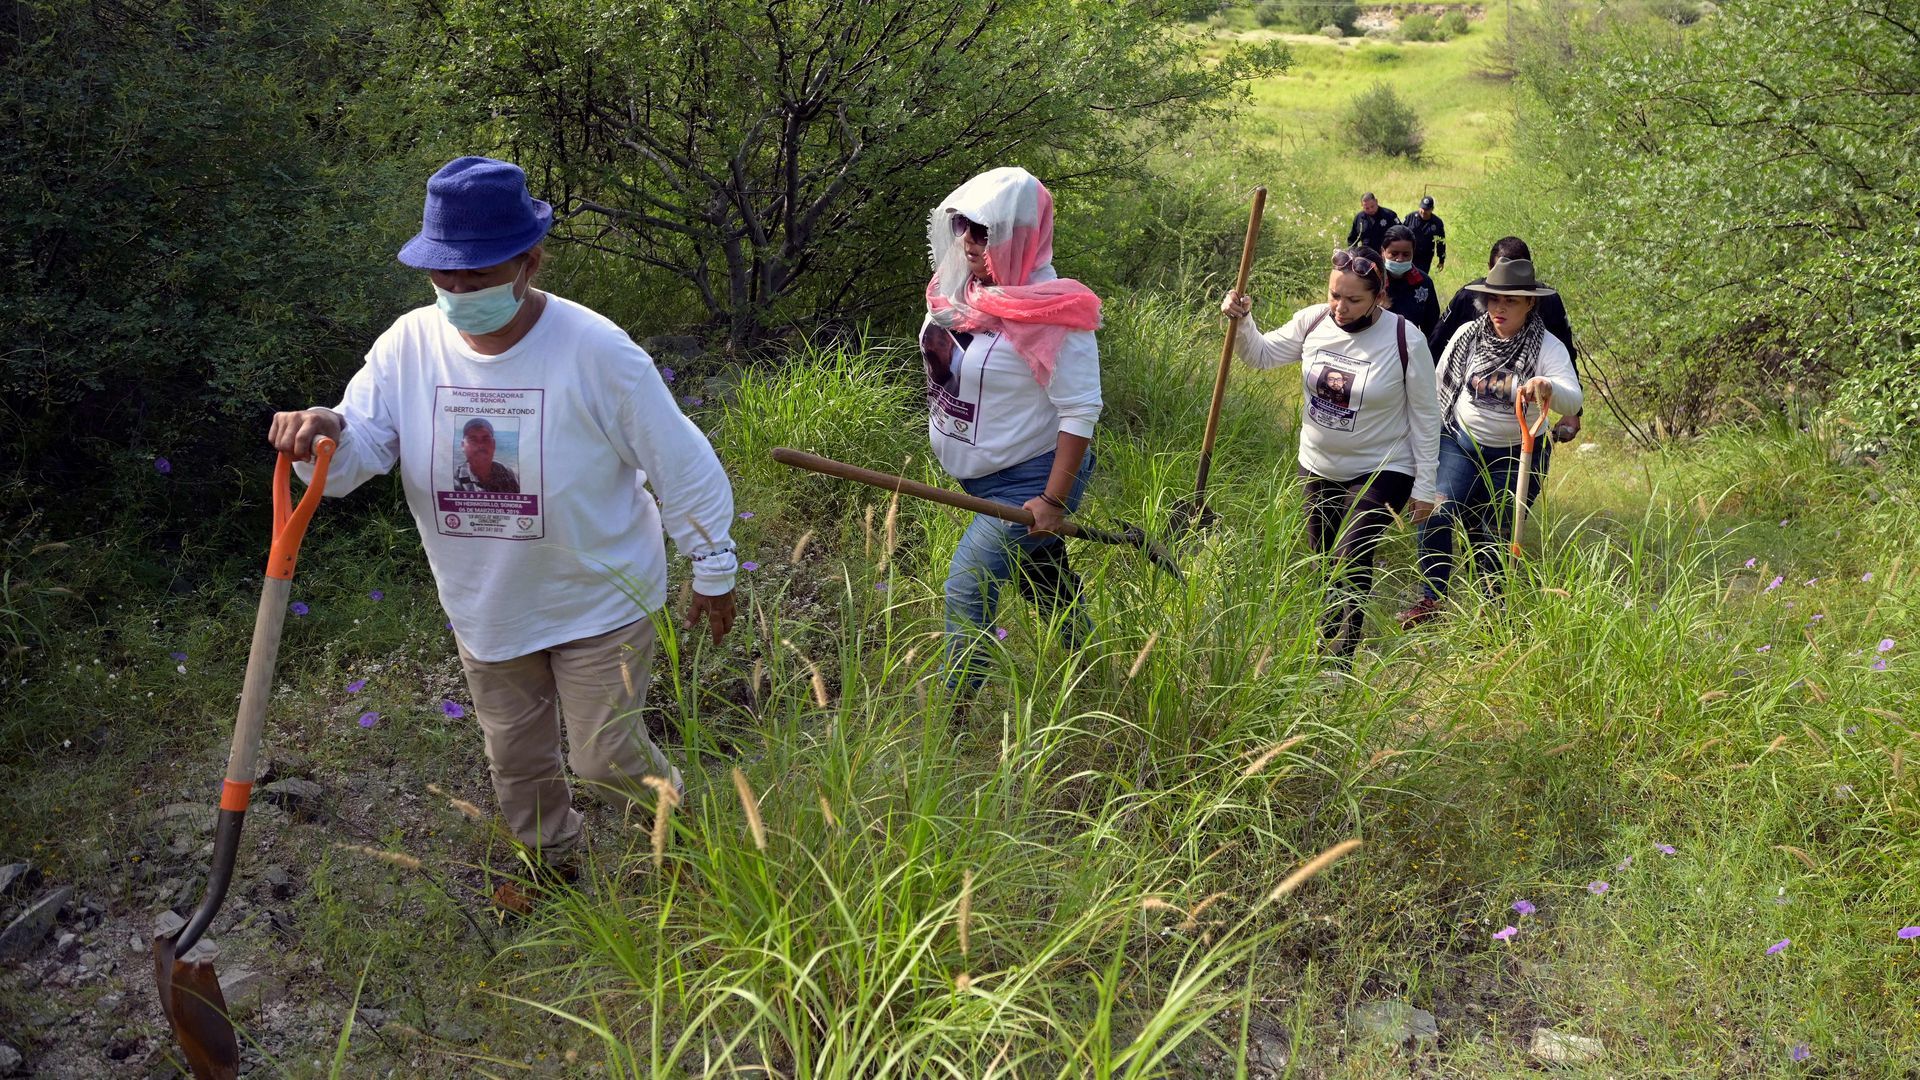 Mexican women who search for their missing loved ones are pictured hiking through a grassy area while carrying shovels